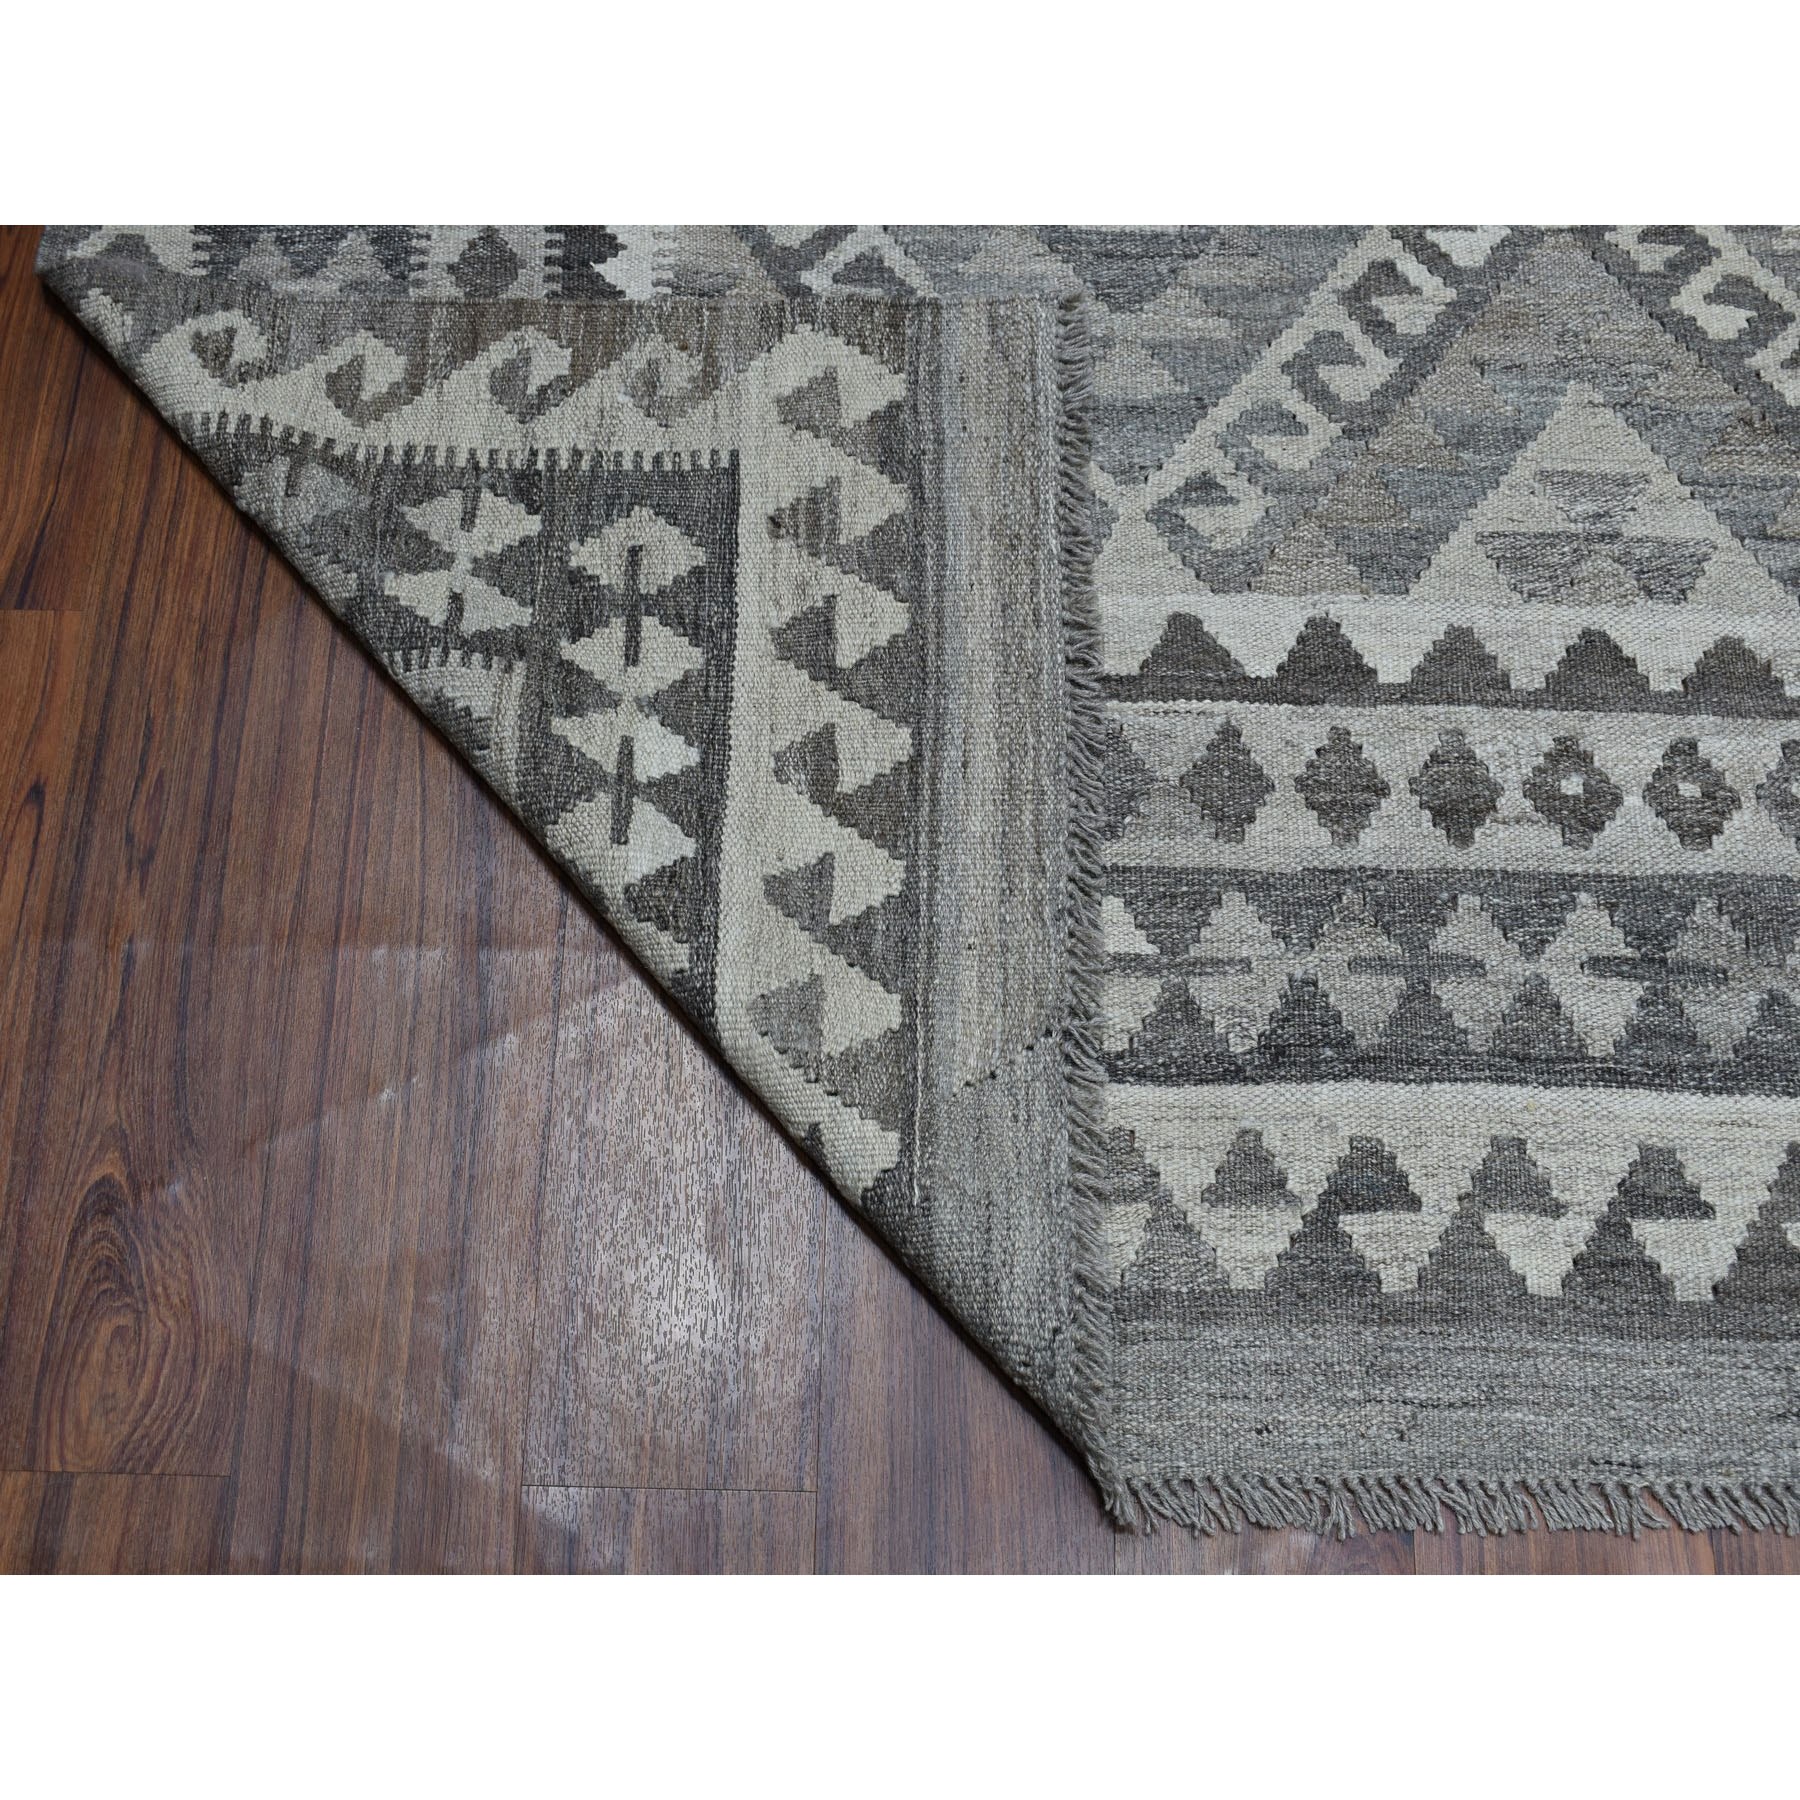 8-3 x9-7  Undyed Natural Wool Afghan Kilim Reversible Hand Woven Oriental Rug 